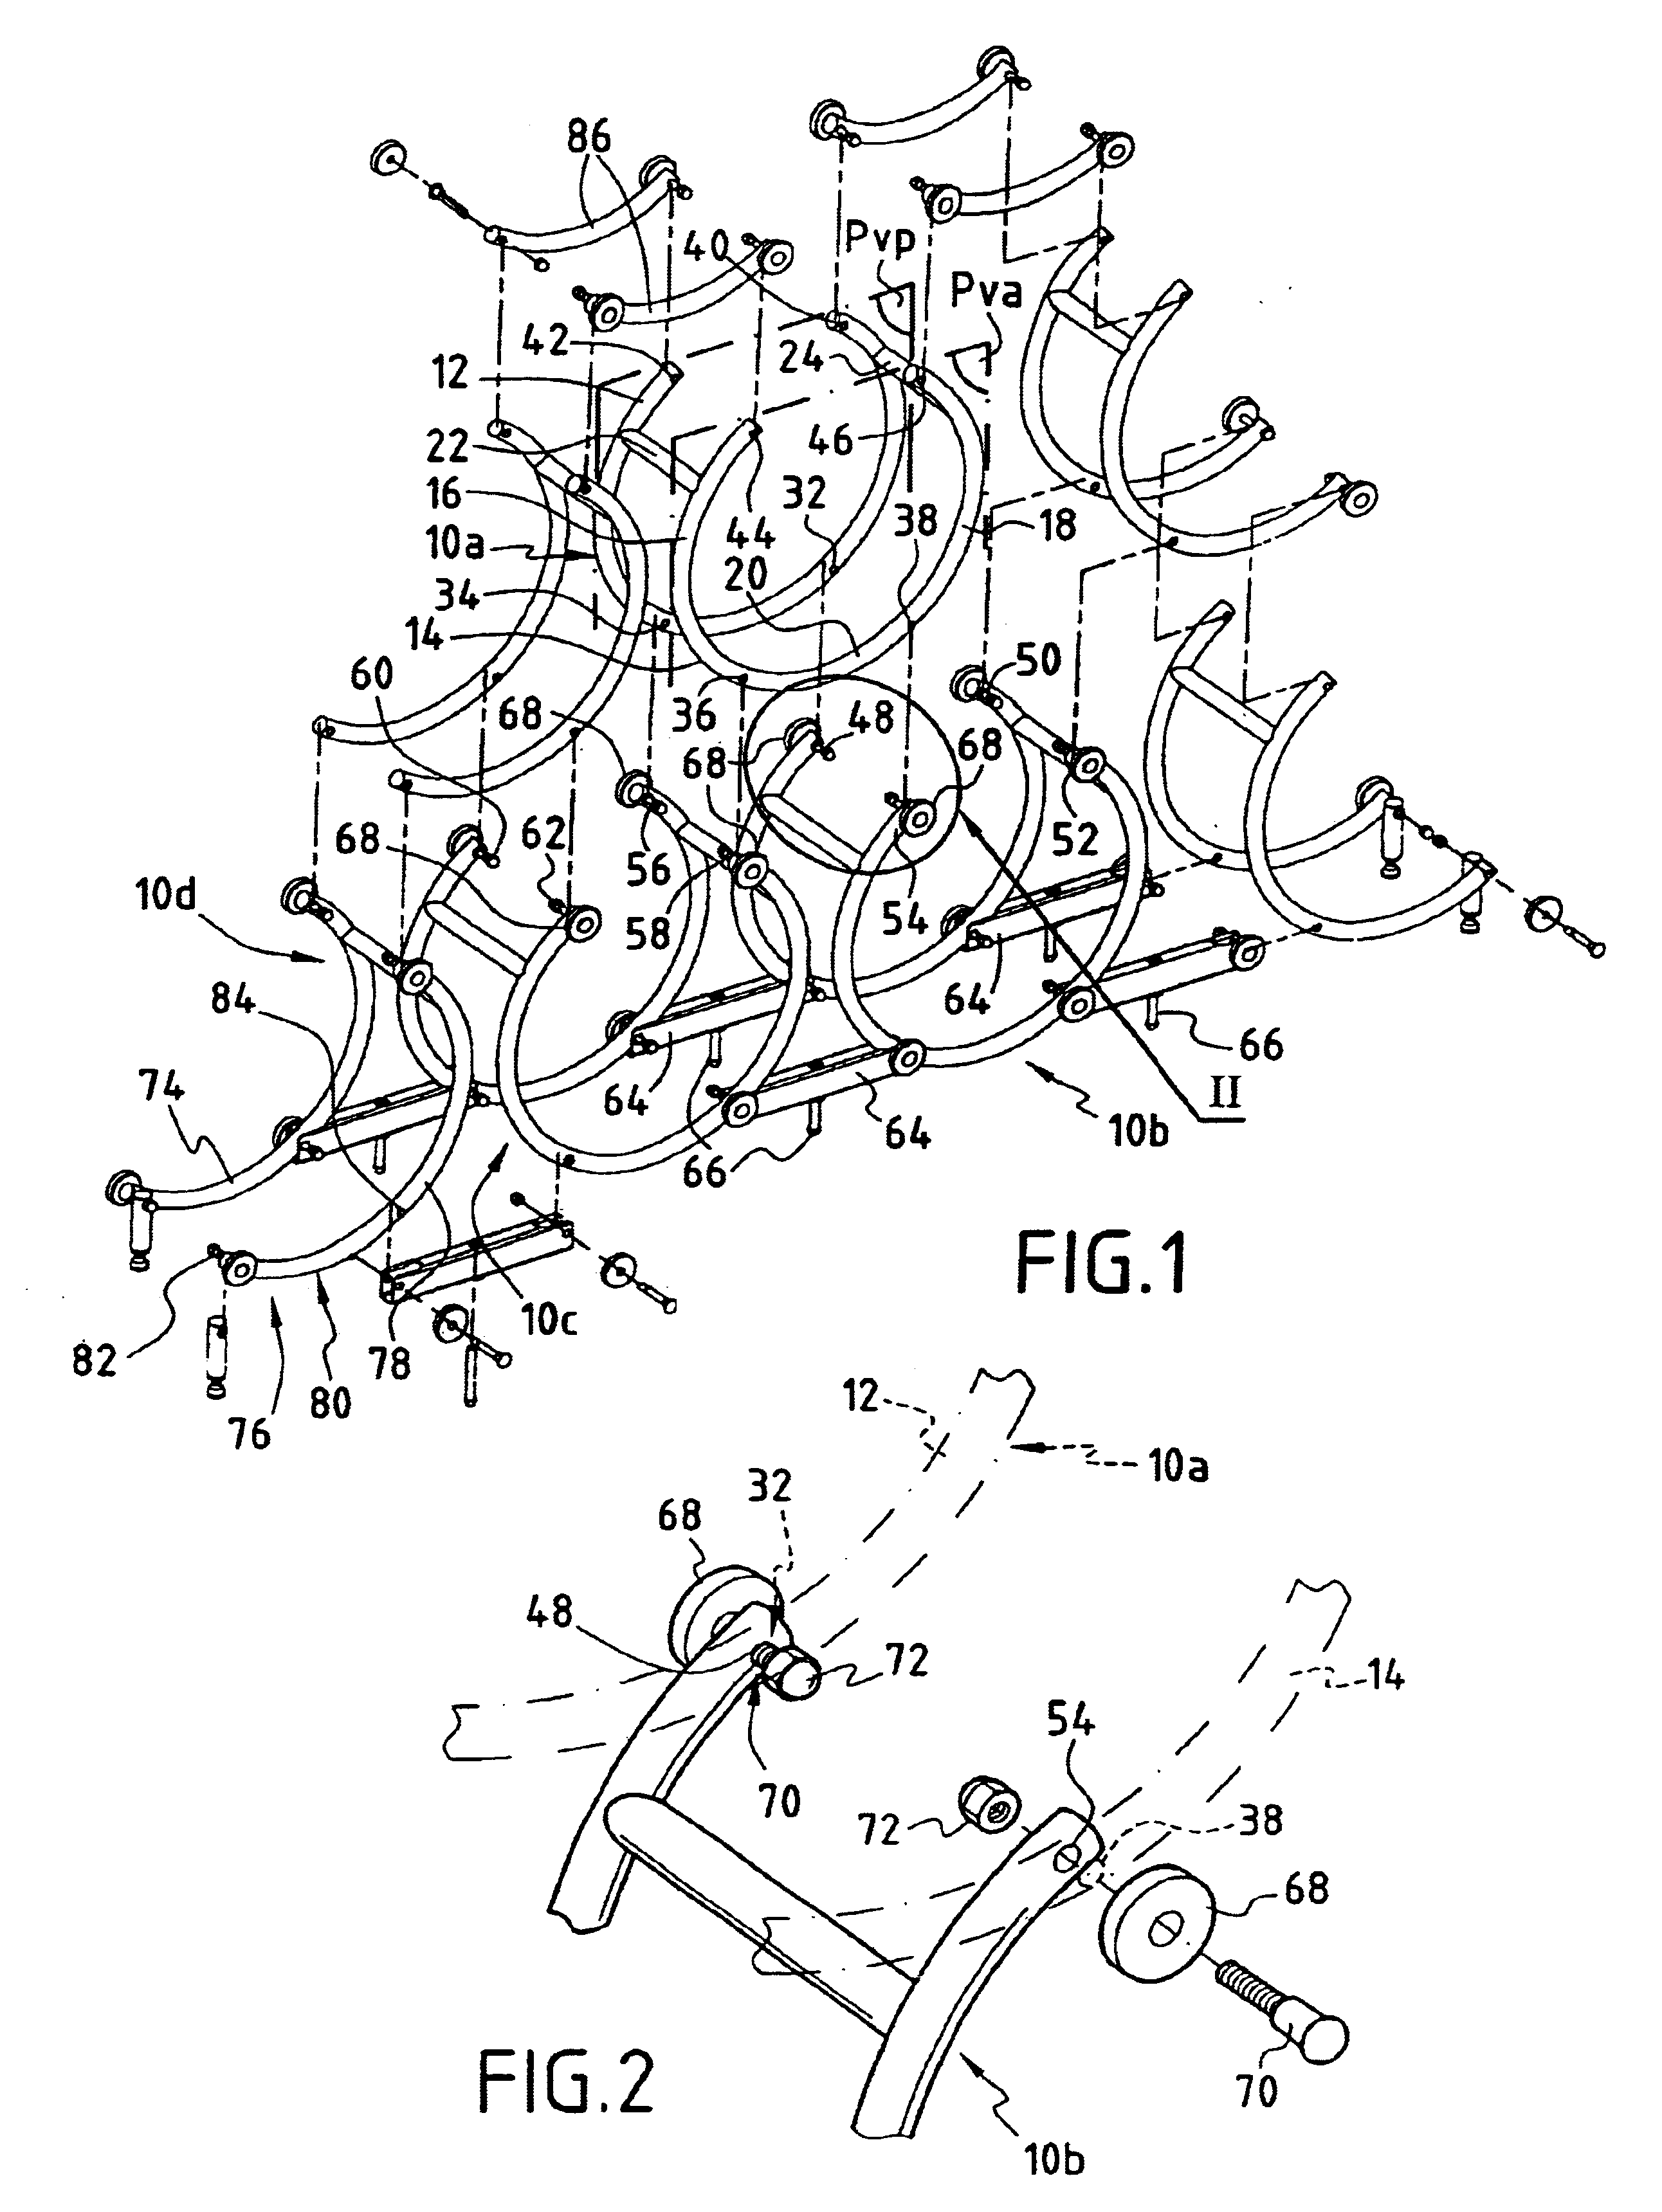 Rack for supporting circularly symmetrical containers